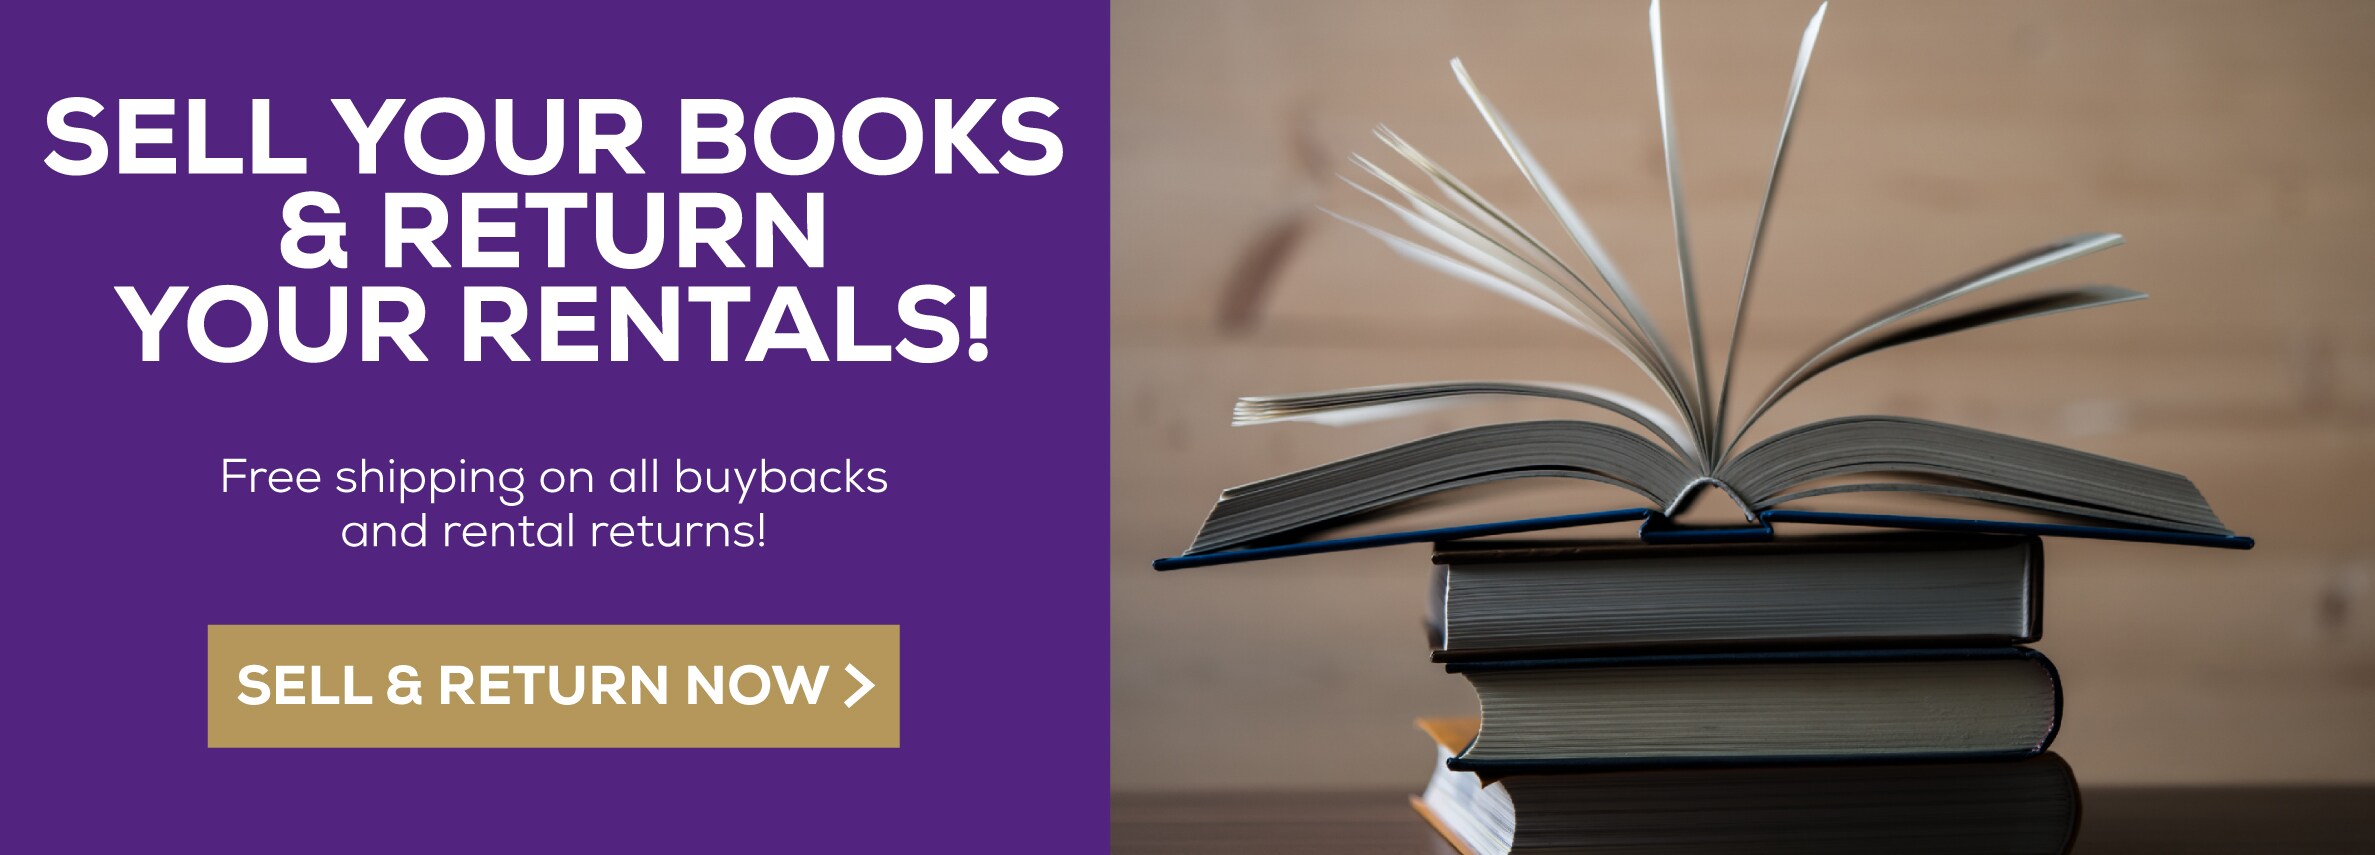 Sell Your Books & Return Your Rentals